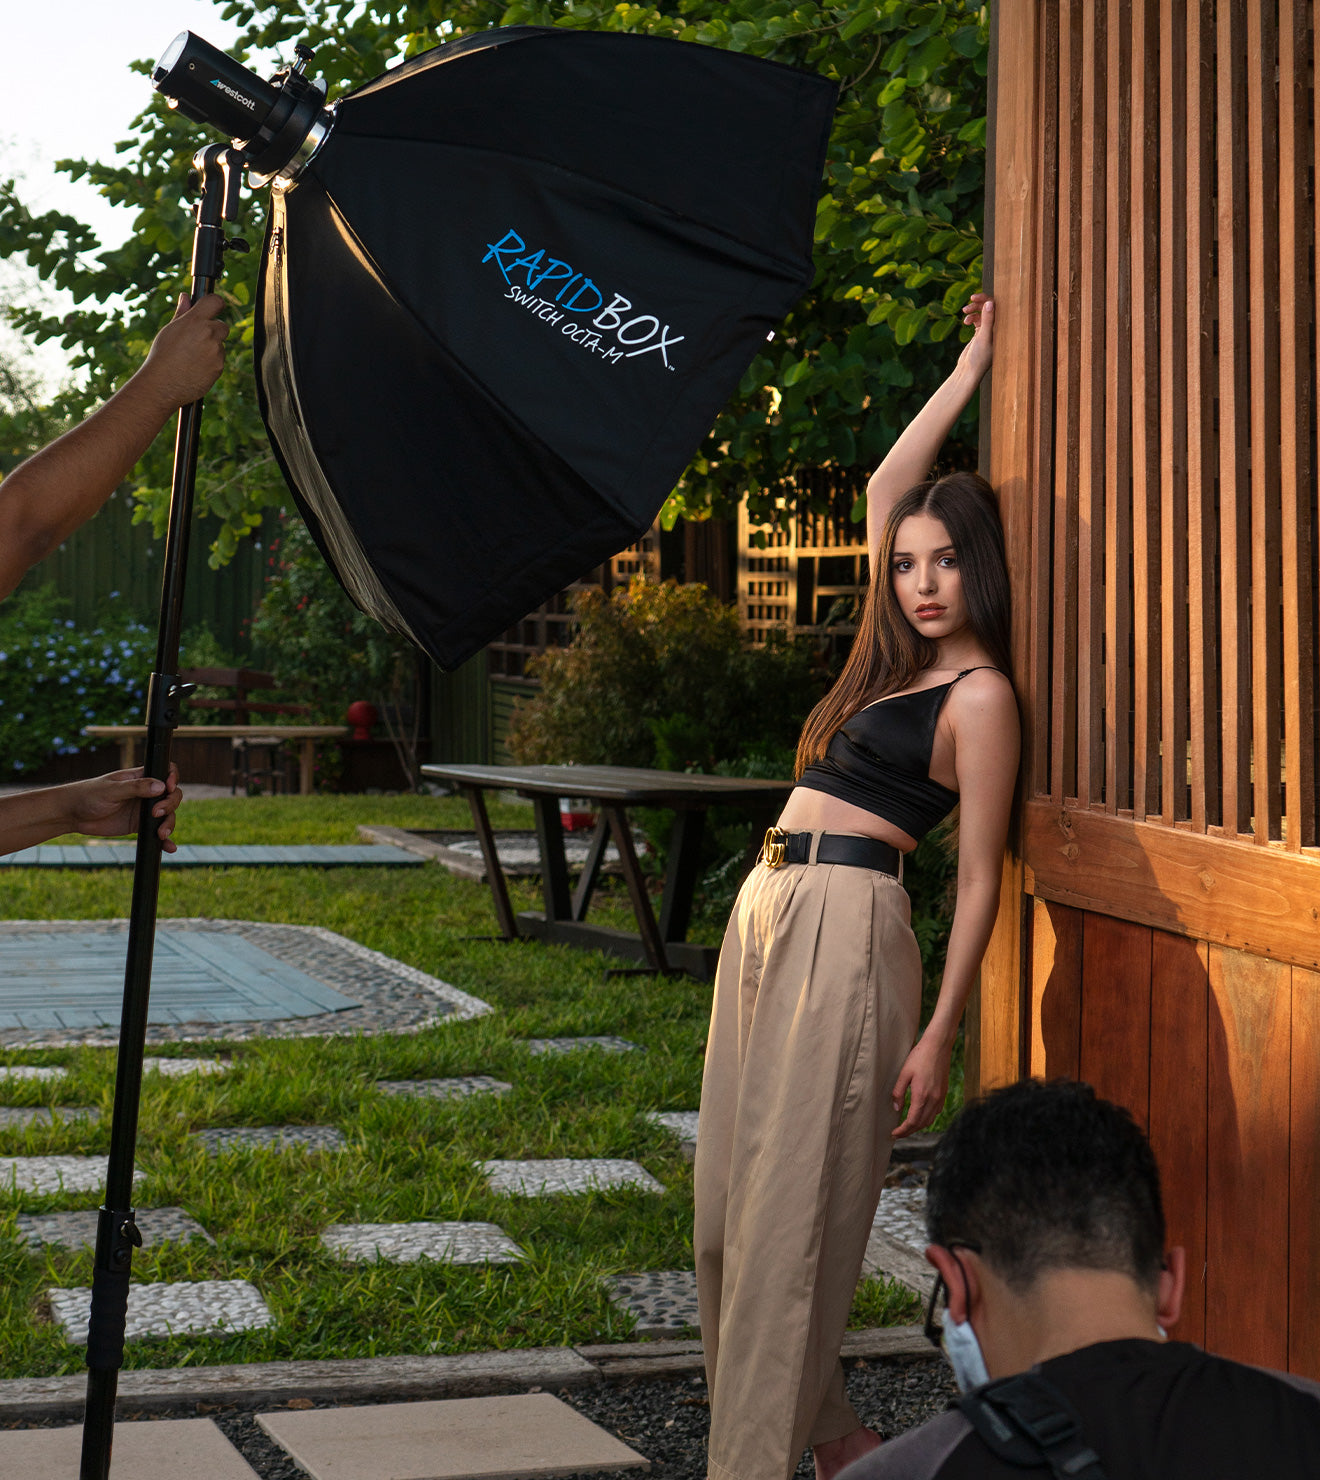 Rapid Box Switch Octa-M with FJ200 Strobe Used for Outdoor Portrait